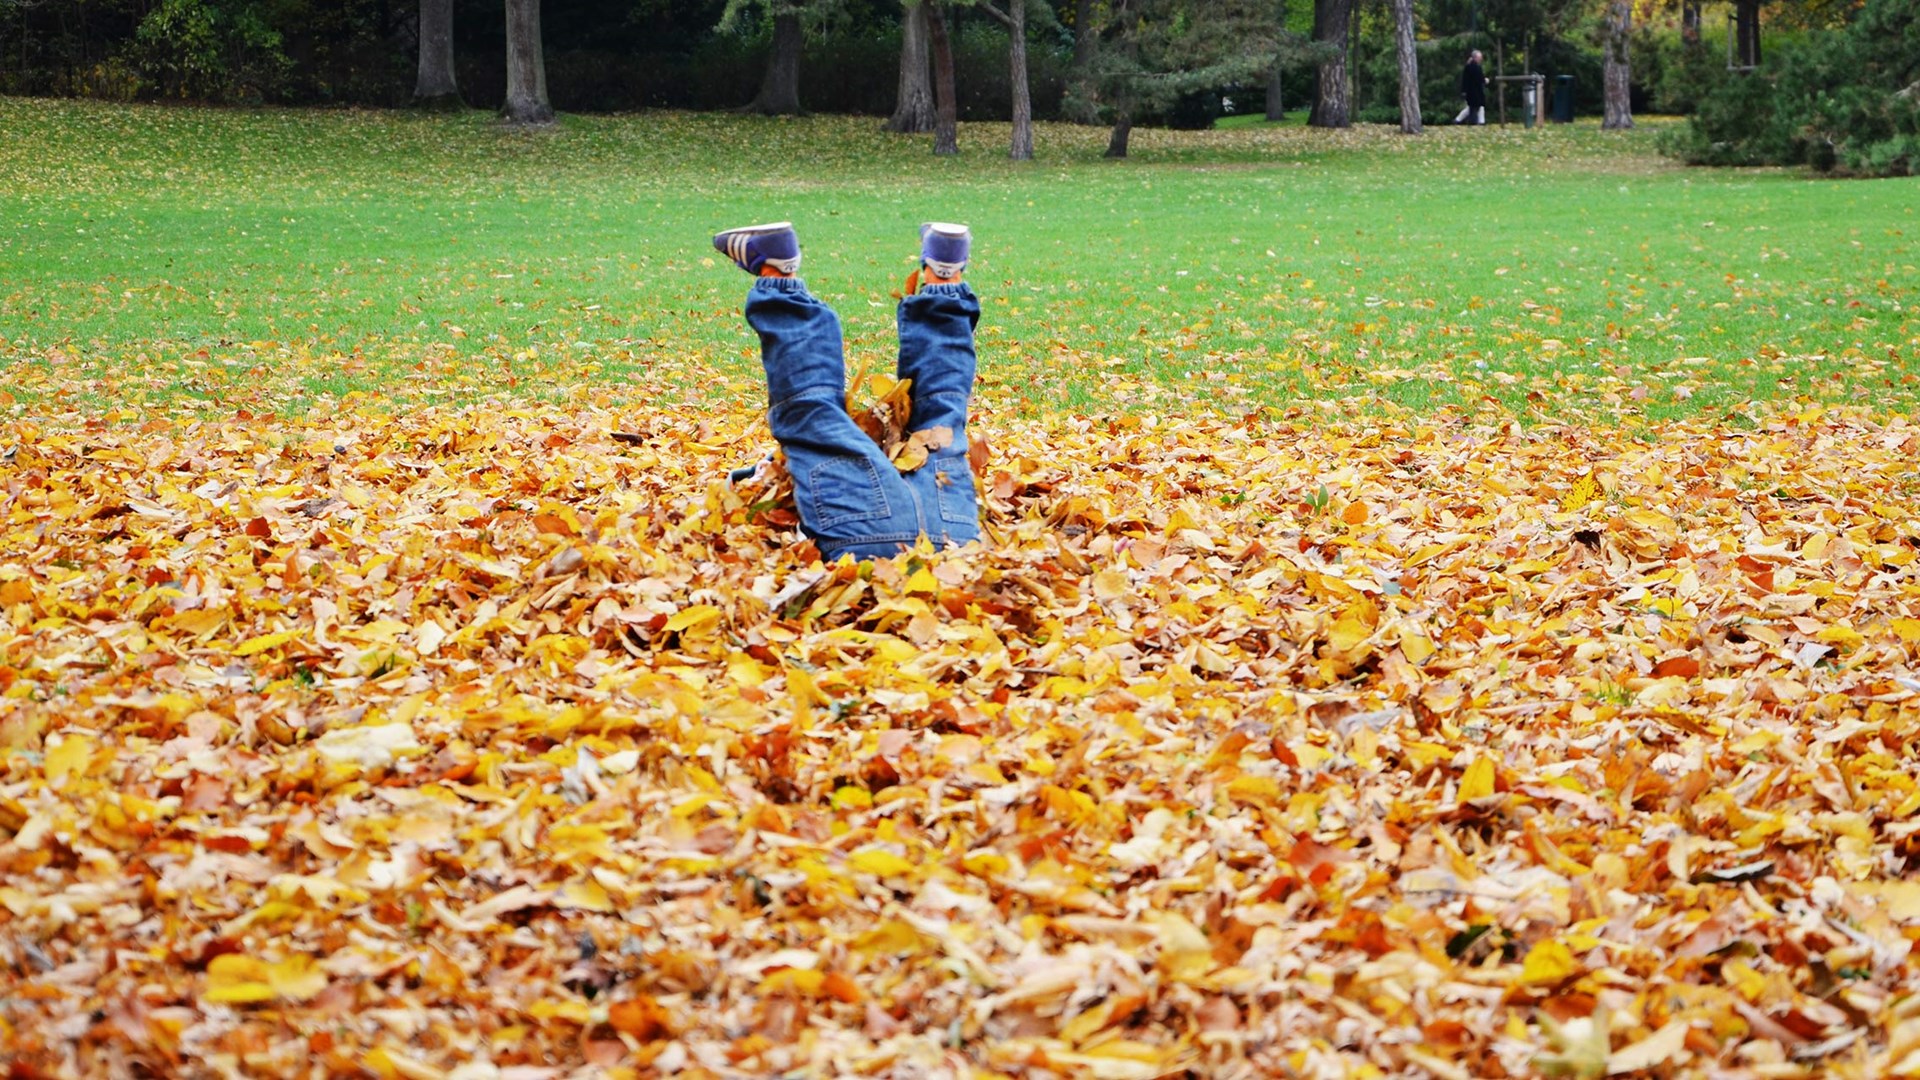 Picture of a kid in a pile of leaves. Only the legs are visible. In the background a big green lawn.